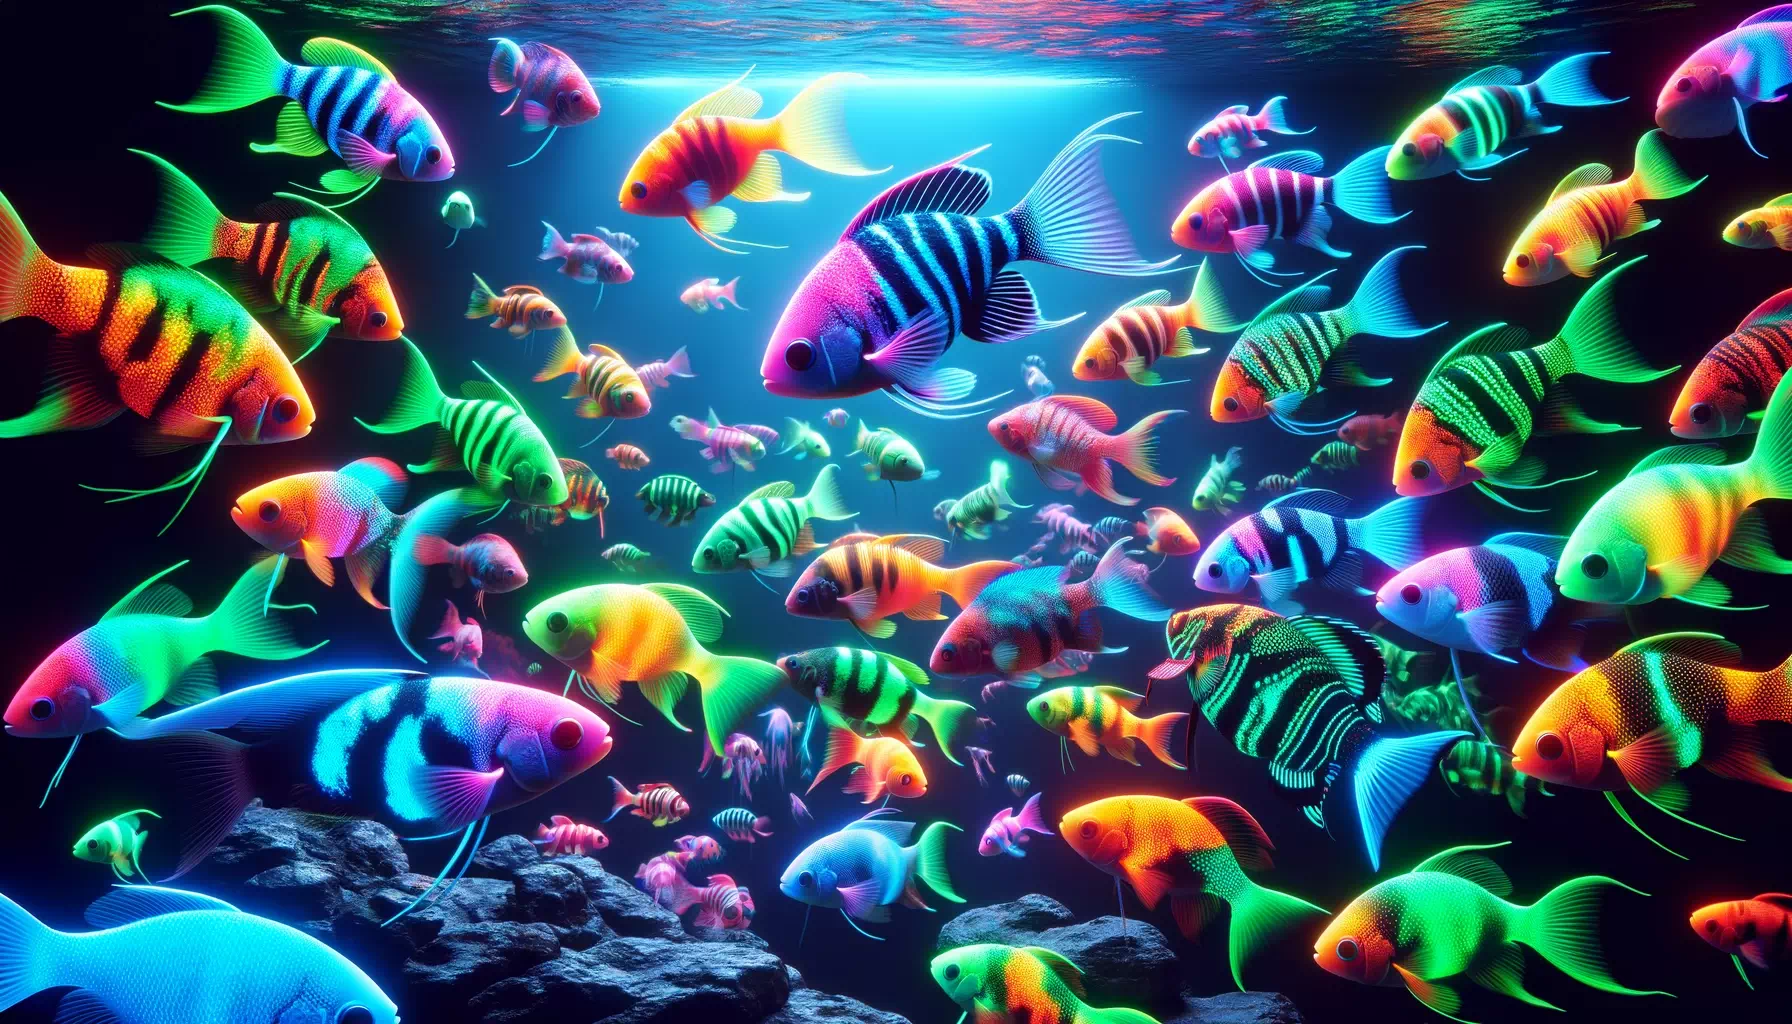 showcasing a variety of GloFish, focusing on their unique features such as vibrant colors, distinctive patterns,